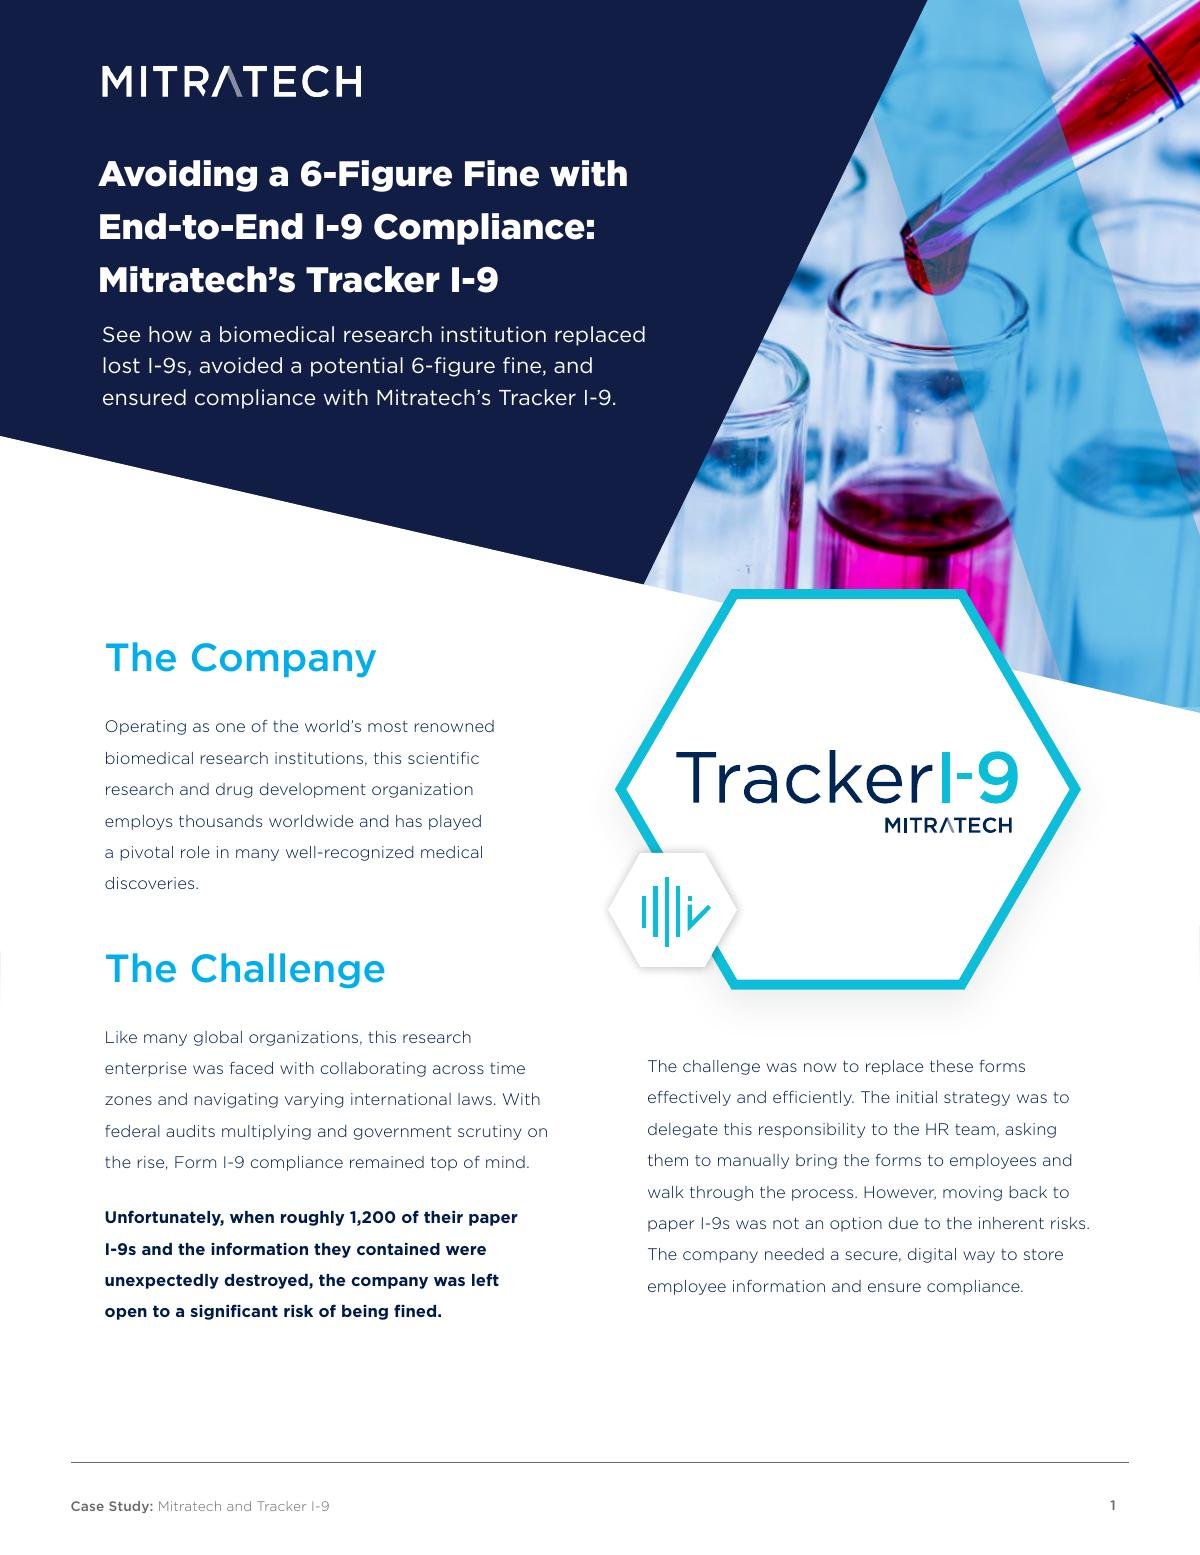 How Tracker I-9 Helped Our Client Avoid a 6-Figure Fine